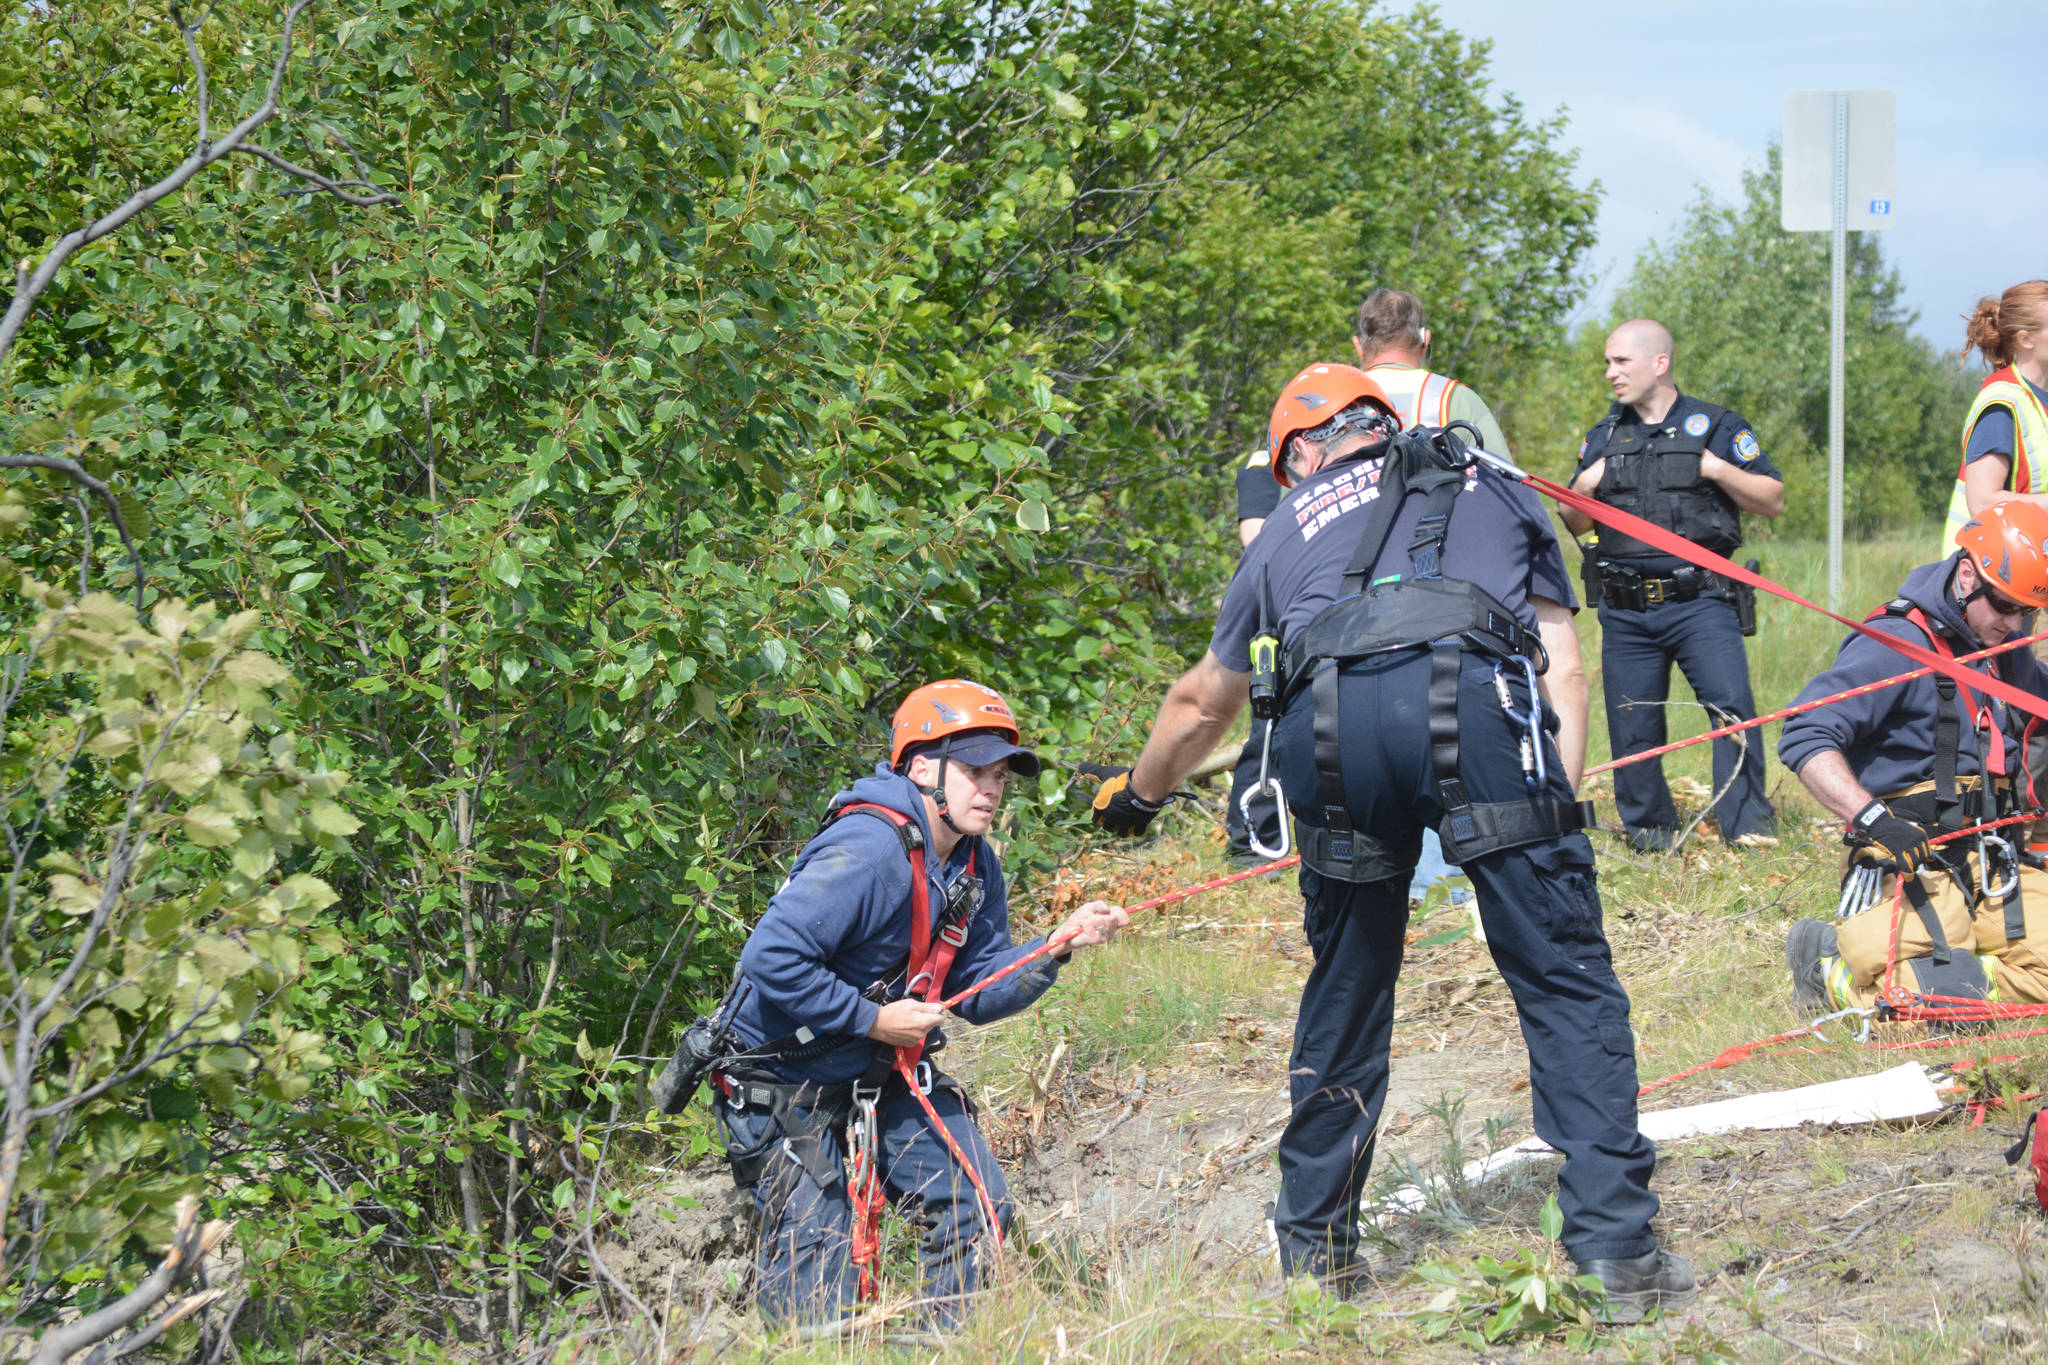 Kachemak Emergency Services assistant chief Joe Sallee helps Homer Volunteer Fire Department firefighter Tim Yarbrough climb out of a ravine about 12:30 p.m. on Monday, July 24, 2017 at the Baycrest Hill turnout in Homer, Alaska. Rescuers found a truck that had plunged over the edge, but did not find any victims. Friends of Thayr Watson, 32, later stopped by the scene to tell them Watson had crashed the truck earlier and was OK. Sallee wears a harness and tether to keep him from falling over the edge. Photo by Michael Armstrong/Homer News